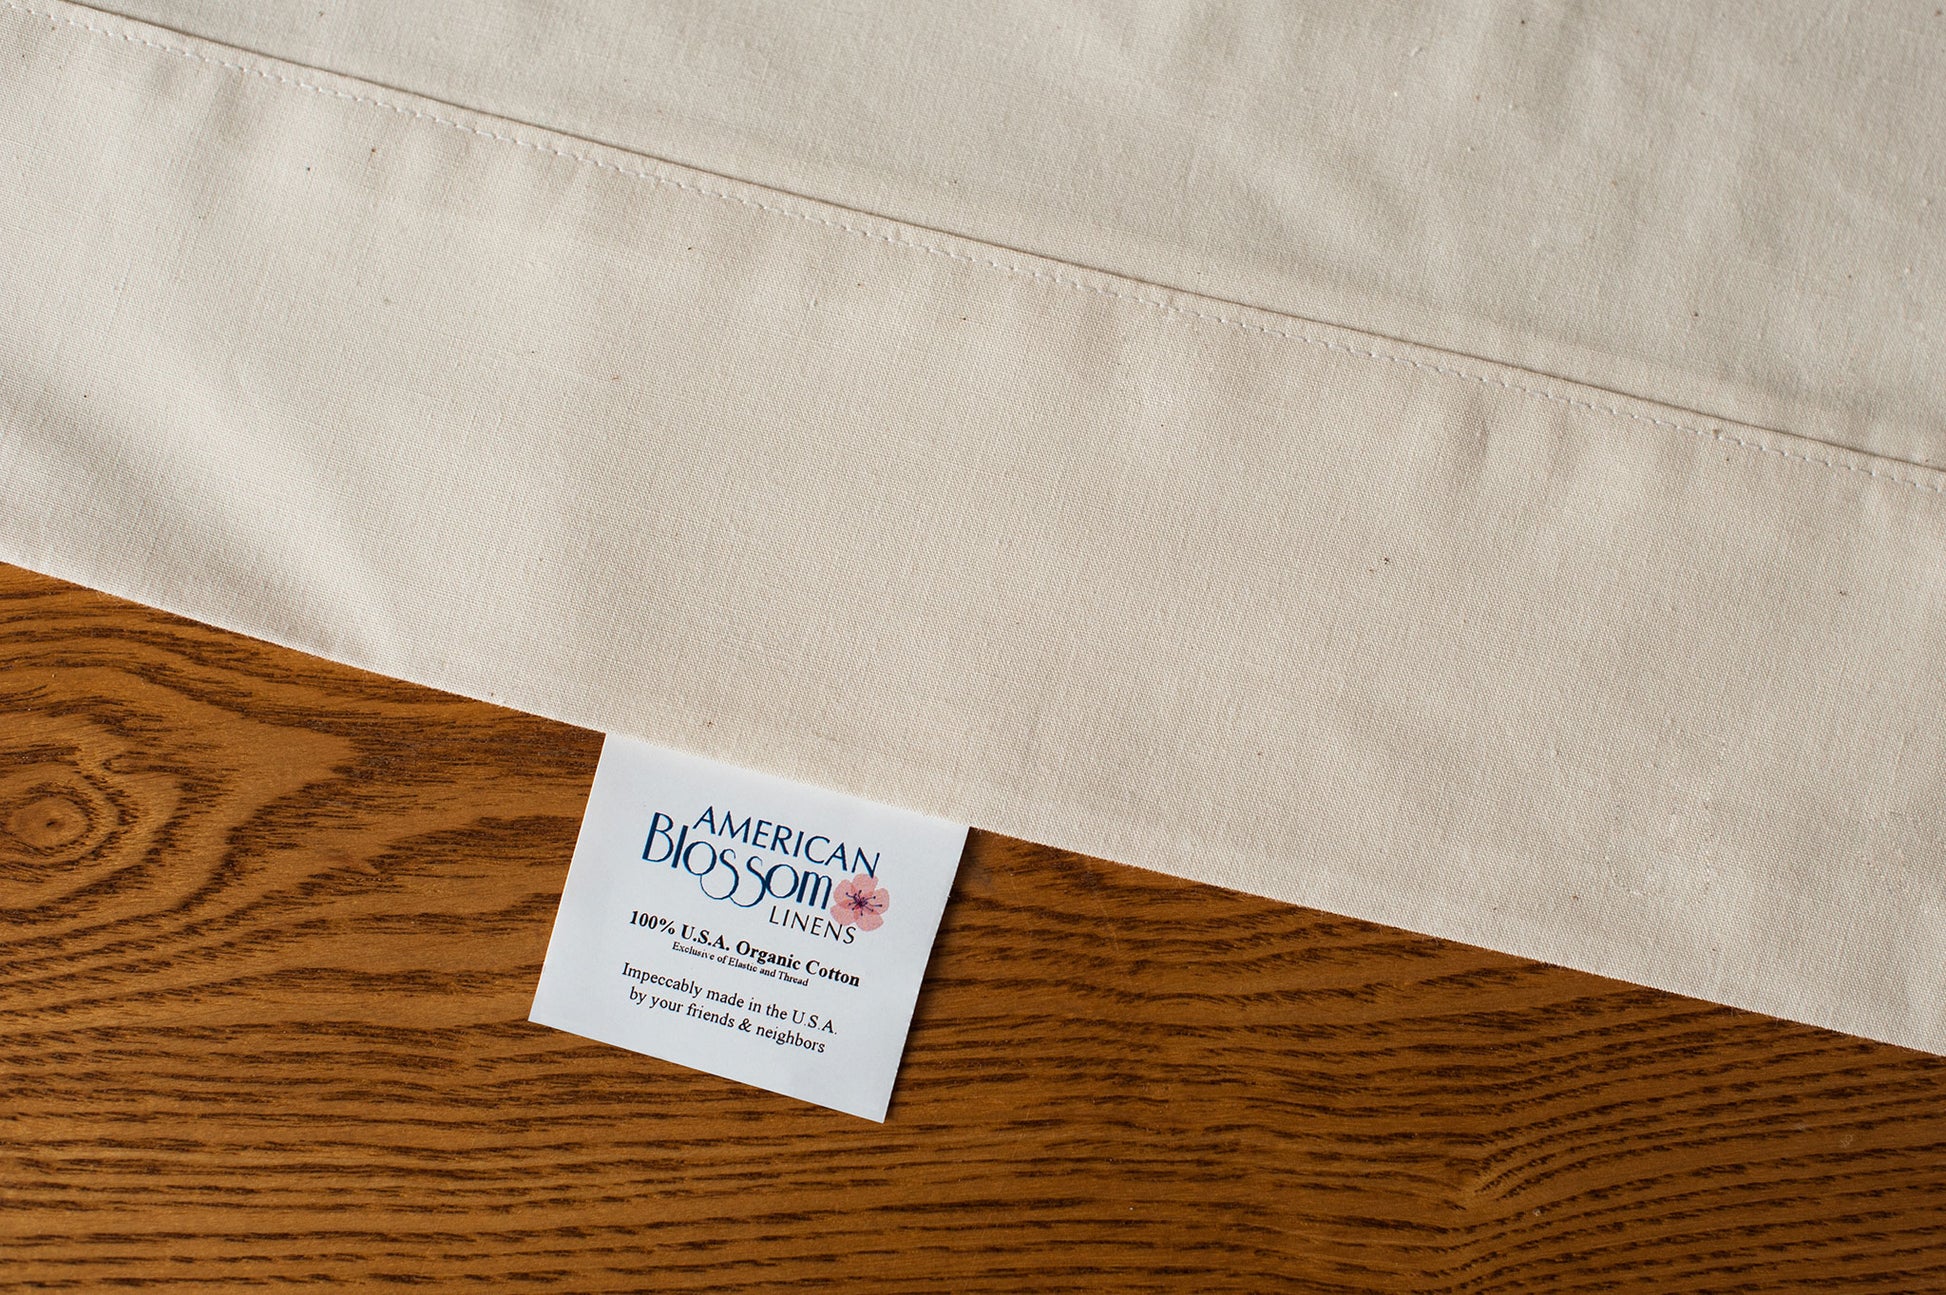 100% Organic Cotton Made in the USA Sheet Sets | Towels by GUS